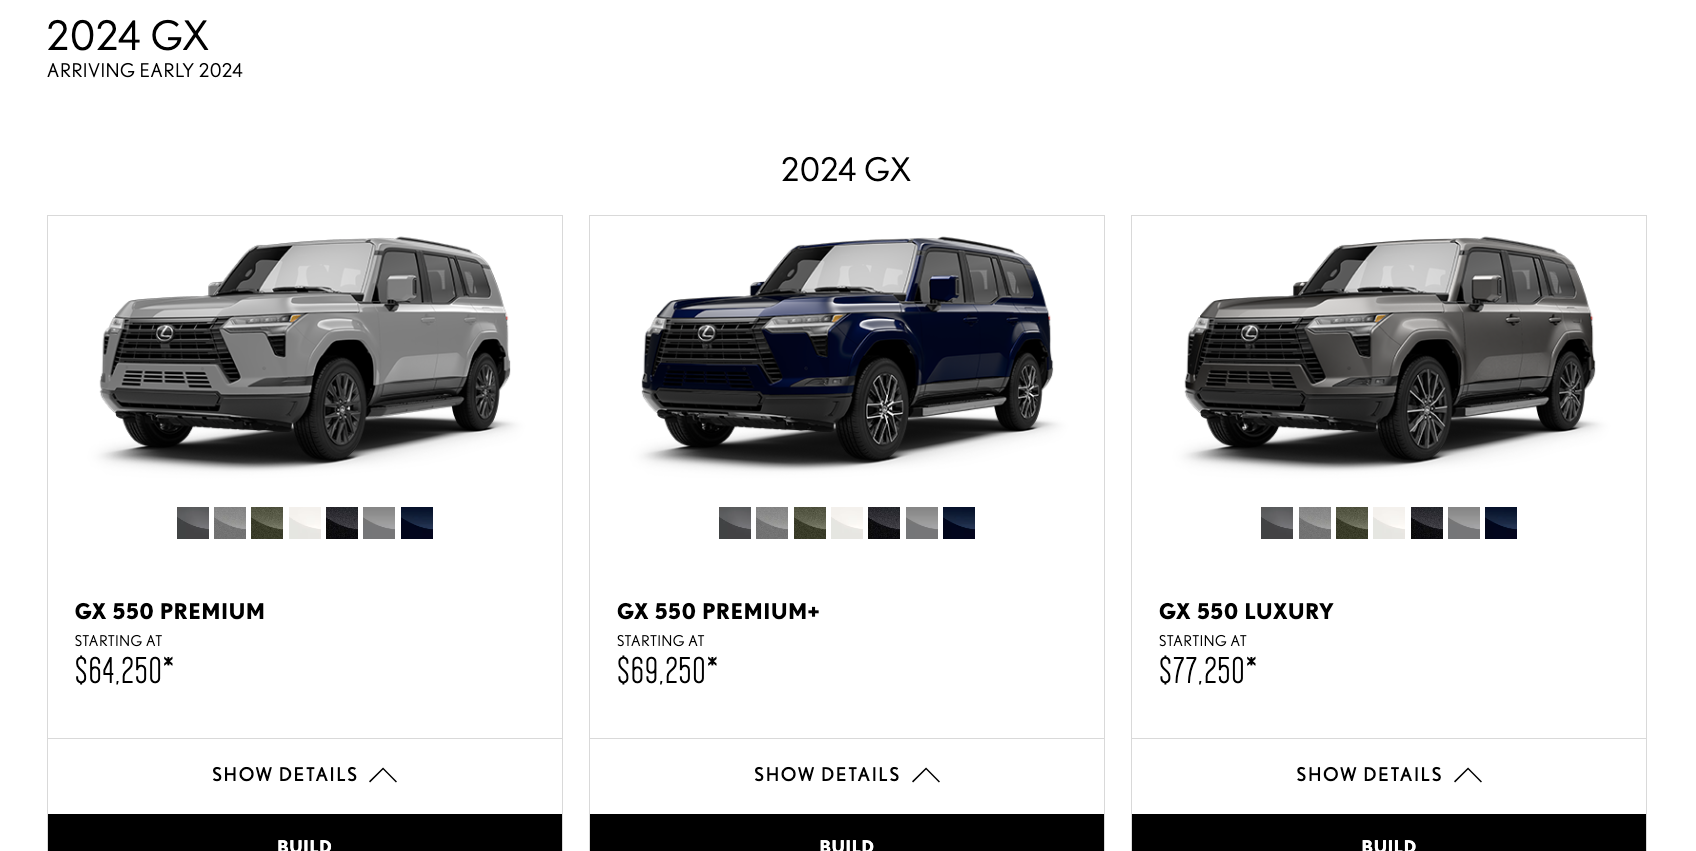 The Lexus GX 550 Configurator Is Full of Off-Road Parts